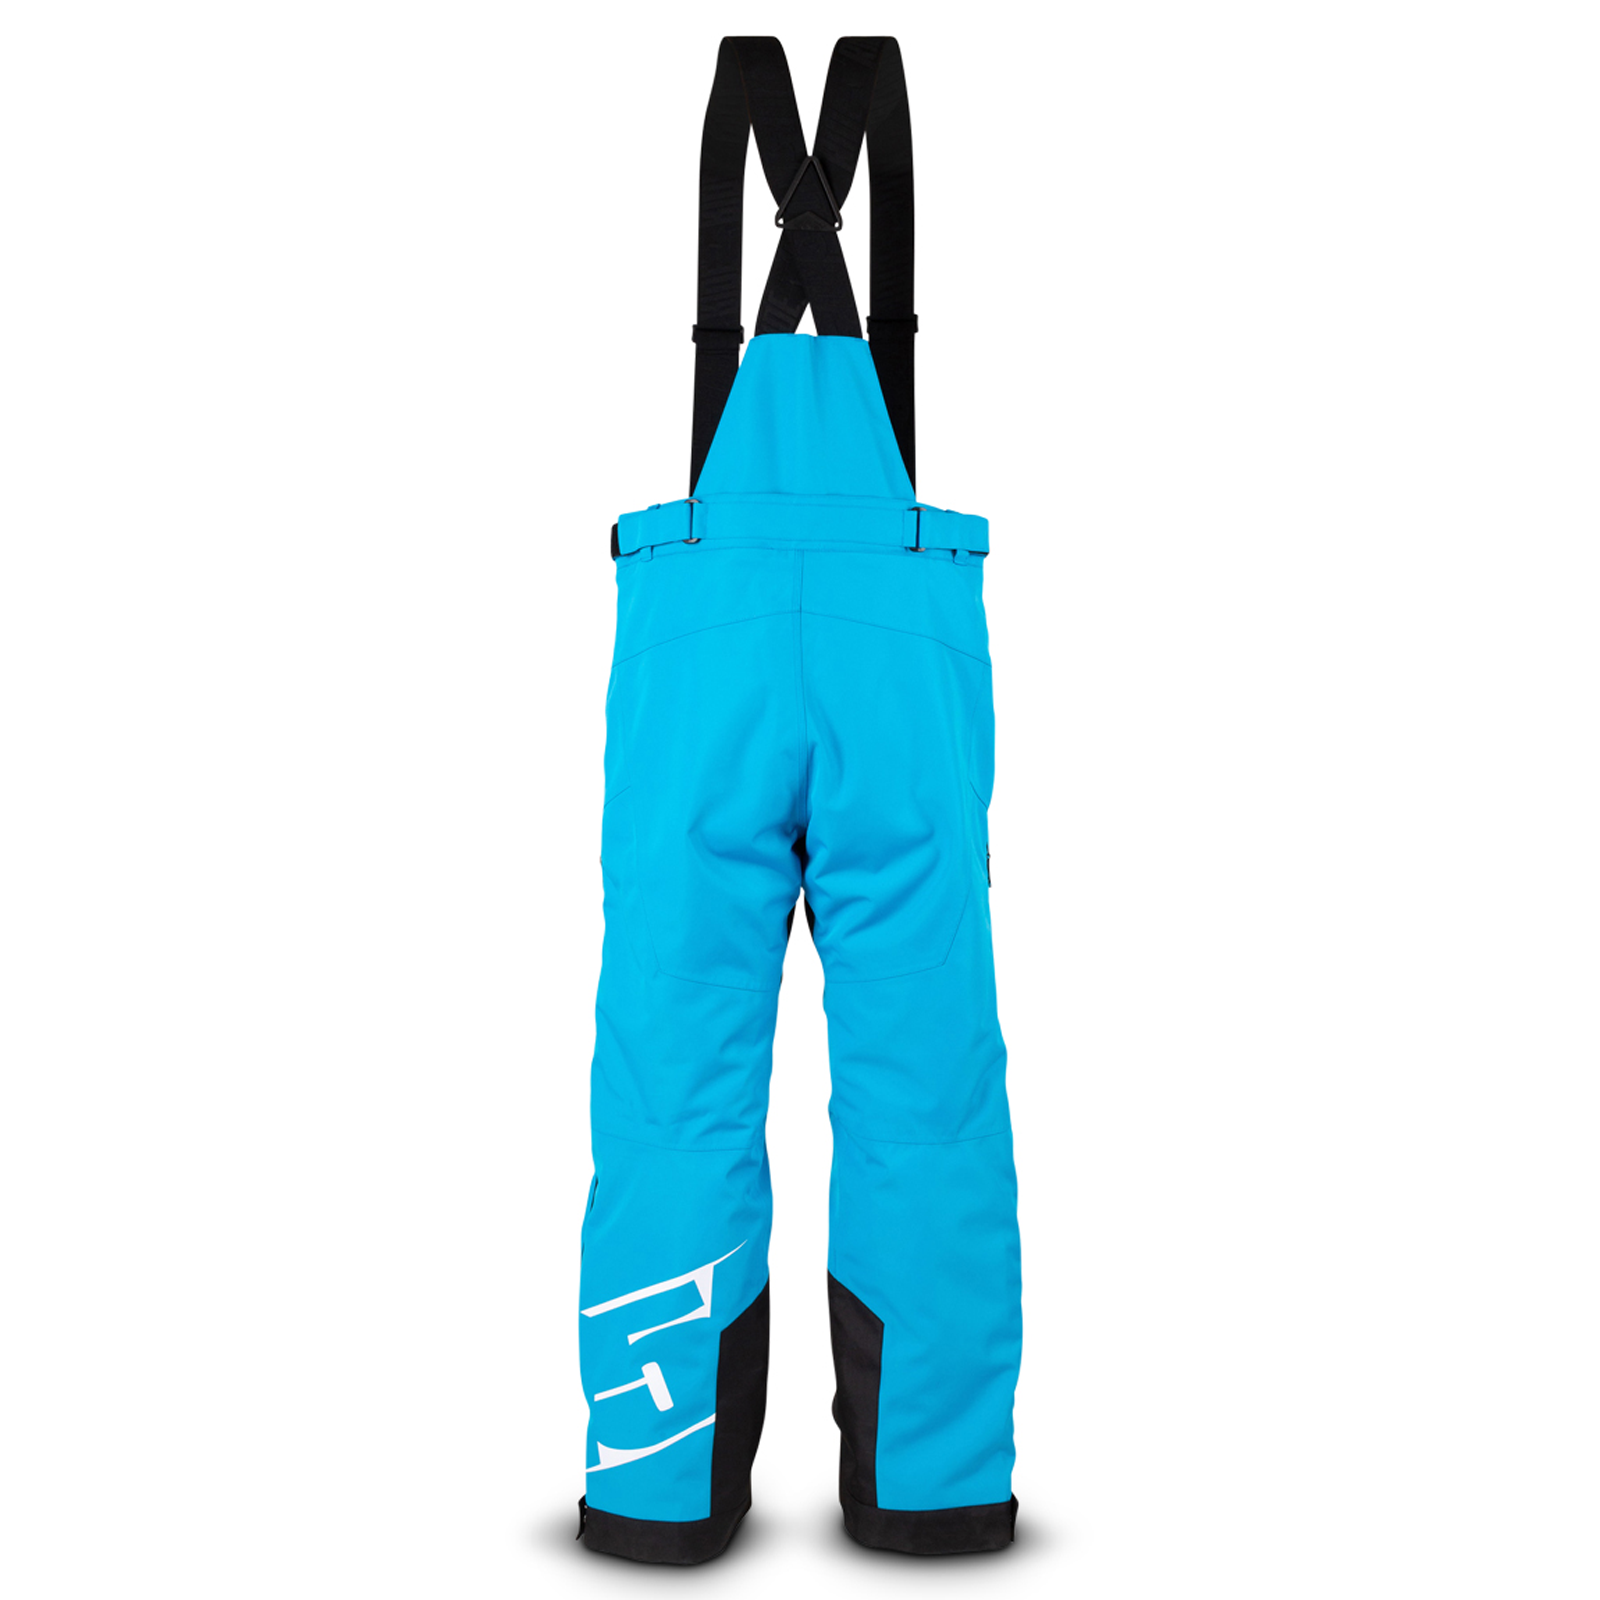 509 R-200 Crossover Pant - GT Cyan